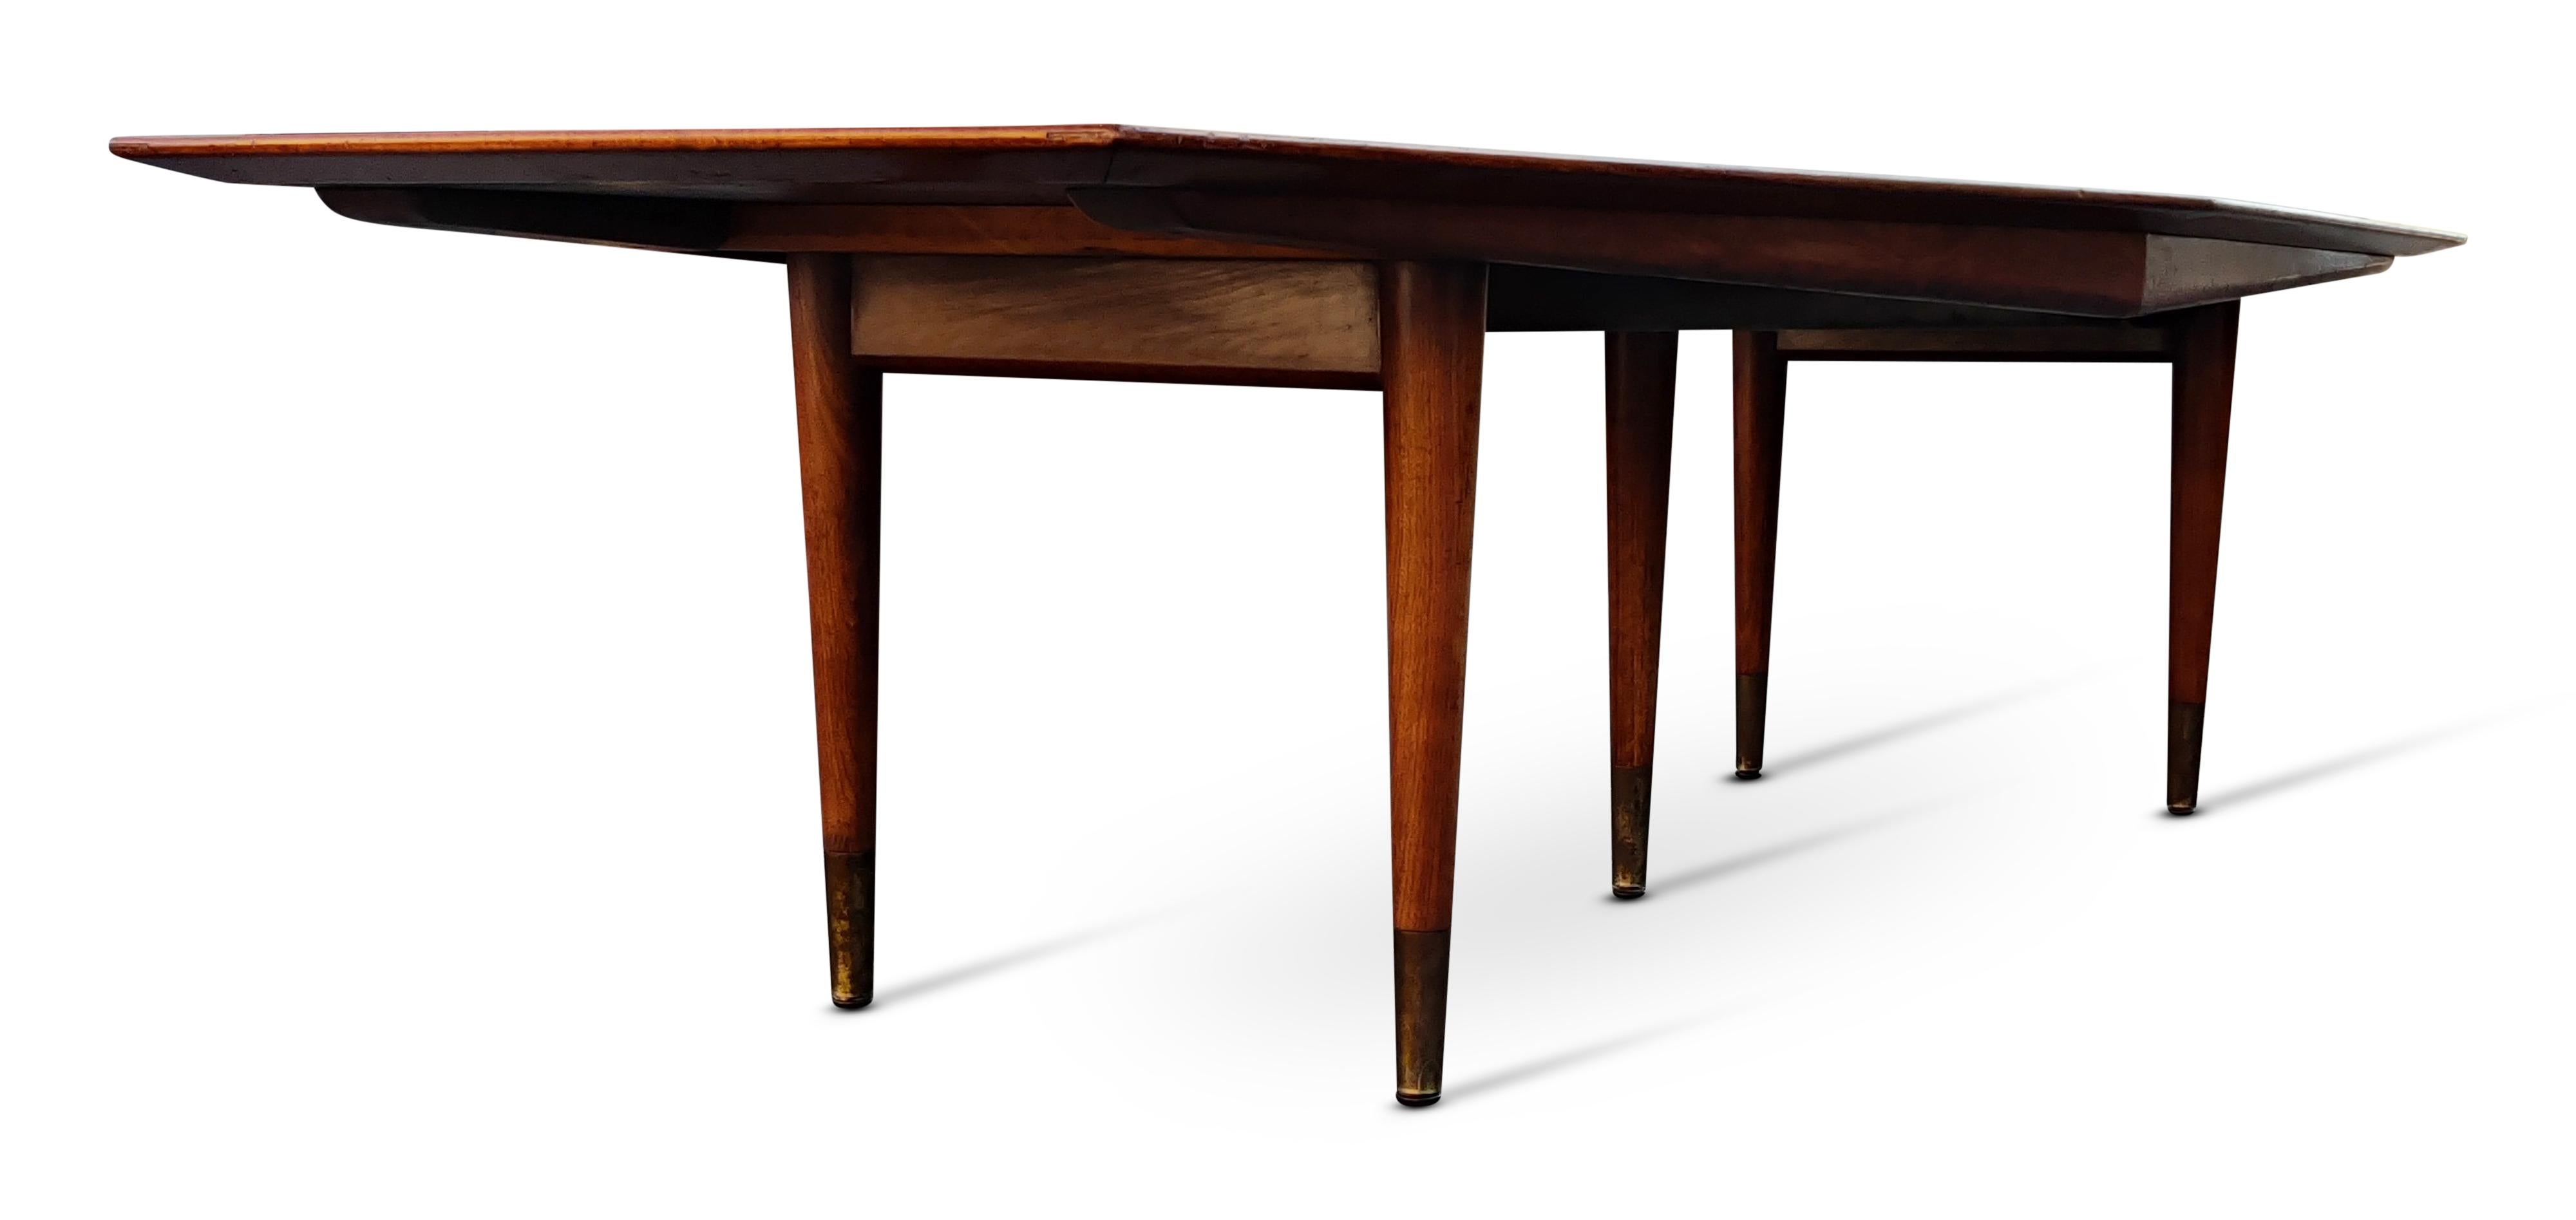 American 10' Conference or Dining Table by Giacomo Buzzitta for Stow & Davis Walnut Brass